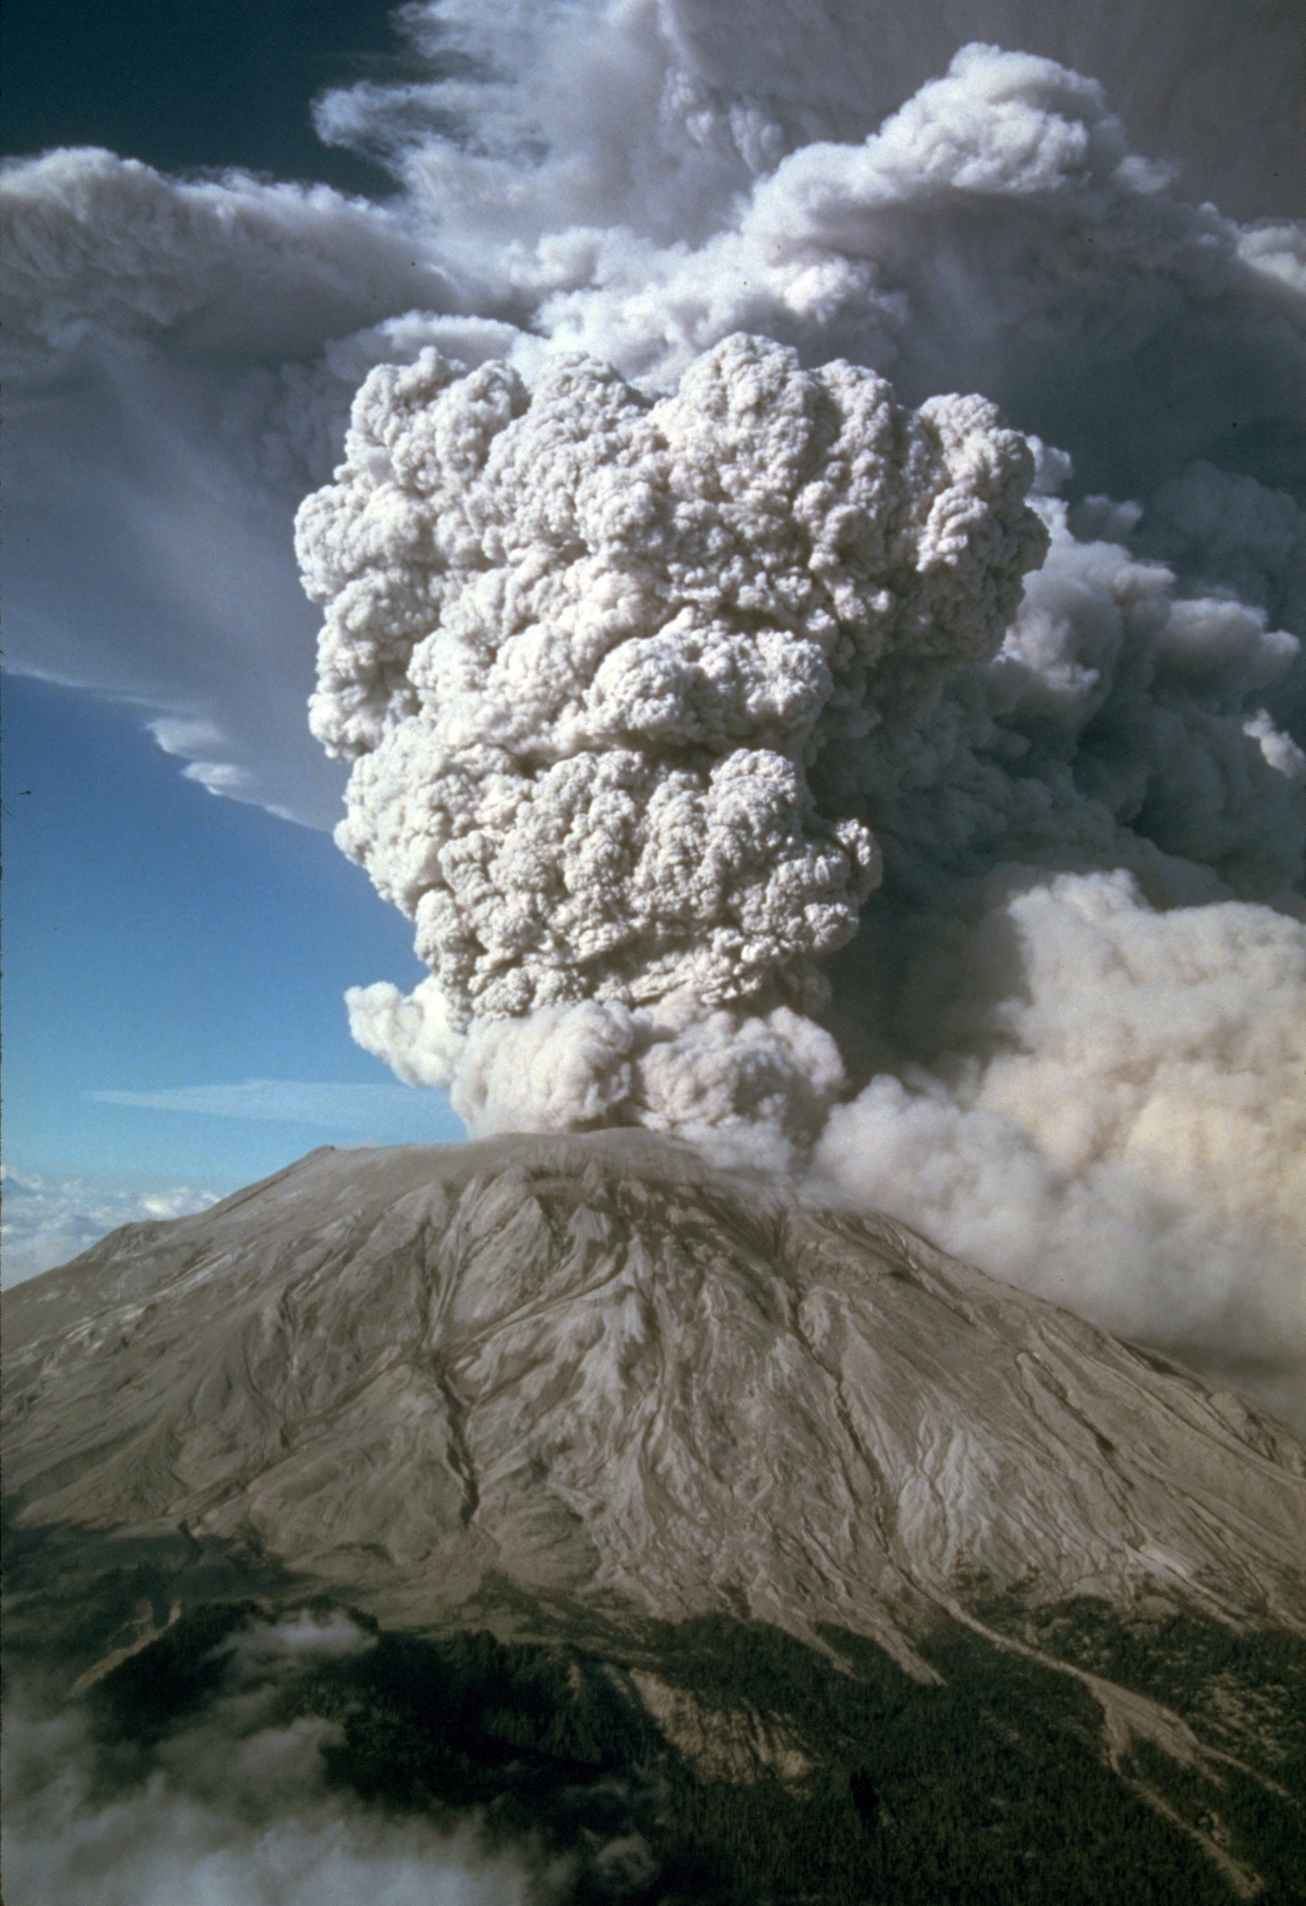 Eruption of Mount St. Helens in 1980, one of the most violent on record.